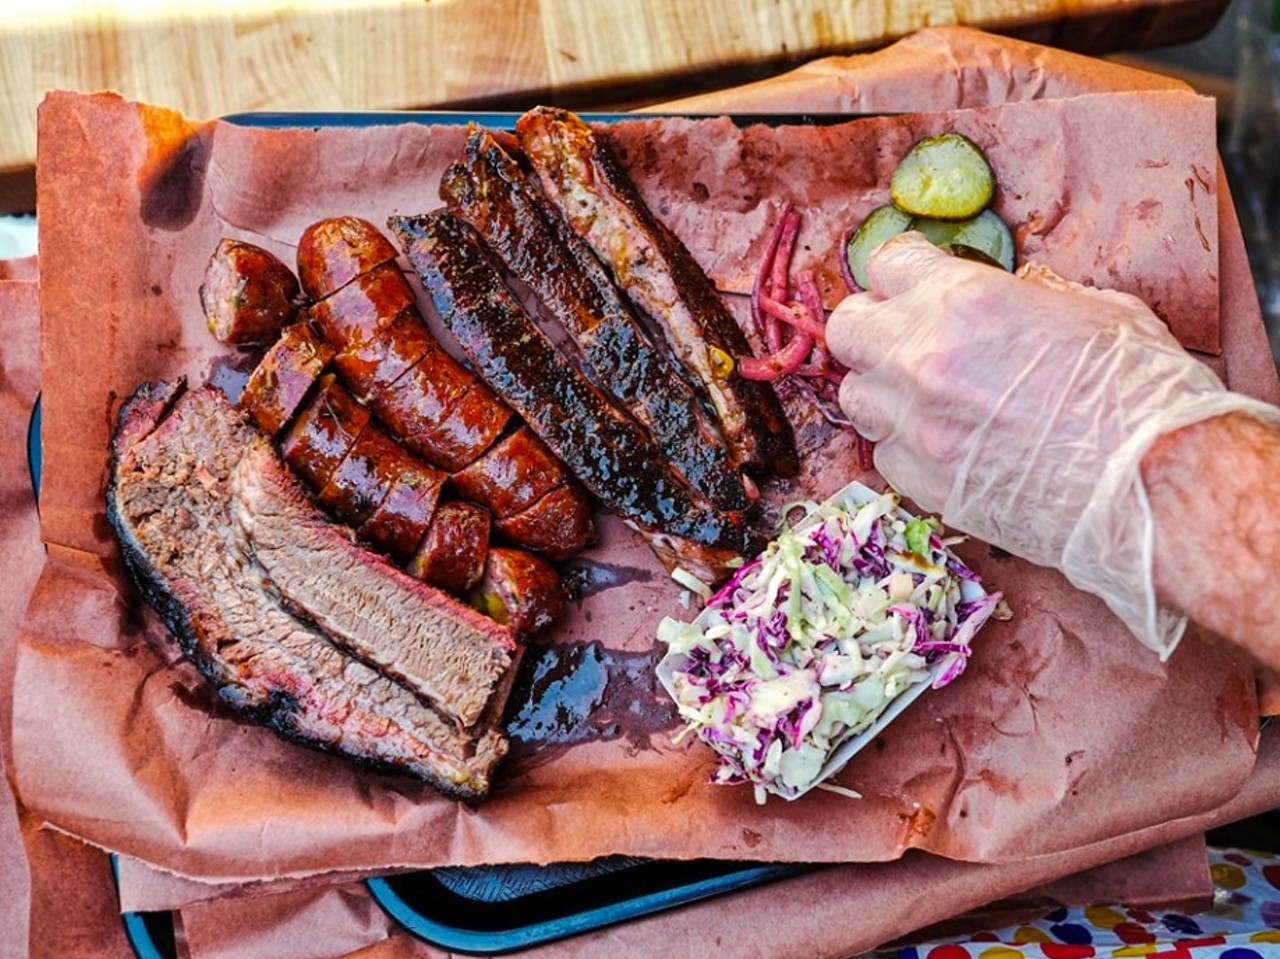 Smokemade Meats and Eats
1400 S. Crystal Lake Drive, Orlando
The stellar pop-up run by Tyler Brunache will bring Central Texas-style barbecue to the old Italian House Restaurant space. His brisket might be the best in the city, but other items like cheddar-jalapeño sausage, ribs, smoked turkey and bangin’ sides and desserts will set barbecue fiends afire.